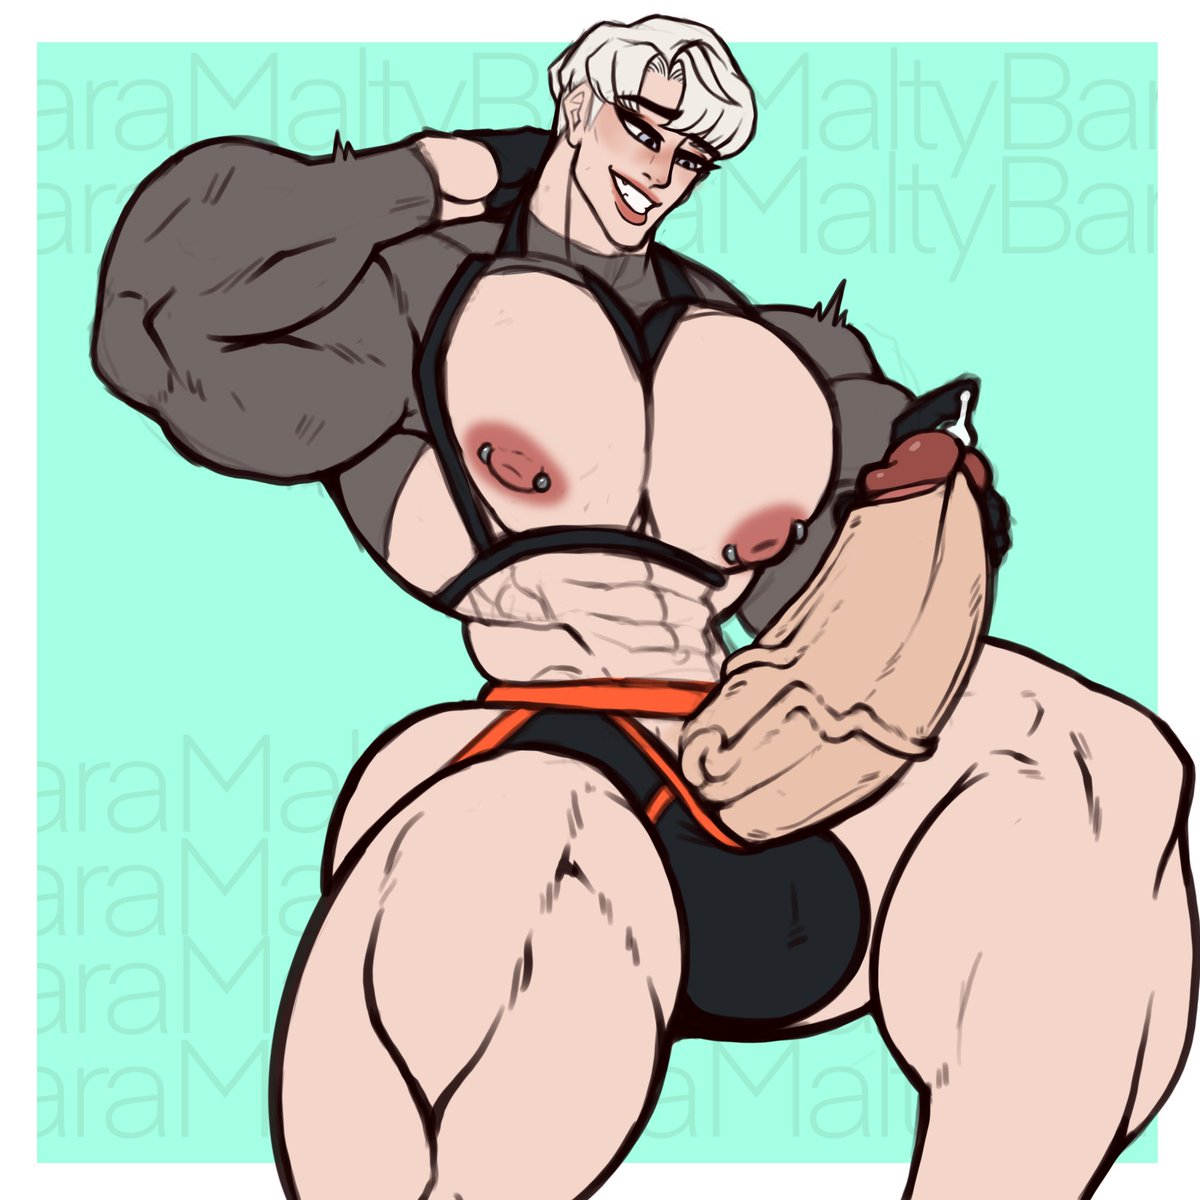 Seo-Jun always get excited whenever he sees the crowd cheers for him whenever he dance~ Here’s my redesign of my OC Seo Jun UwU❤️❤️ Hope it’s worth the wait ÓwÒ~ #bara #nsfwtwtﾟ #Nsfwtwt #hyper #baransfwart #BaraNSFW